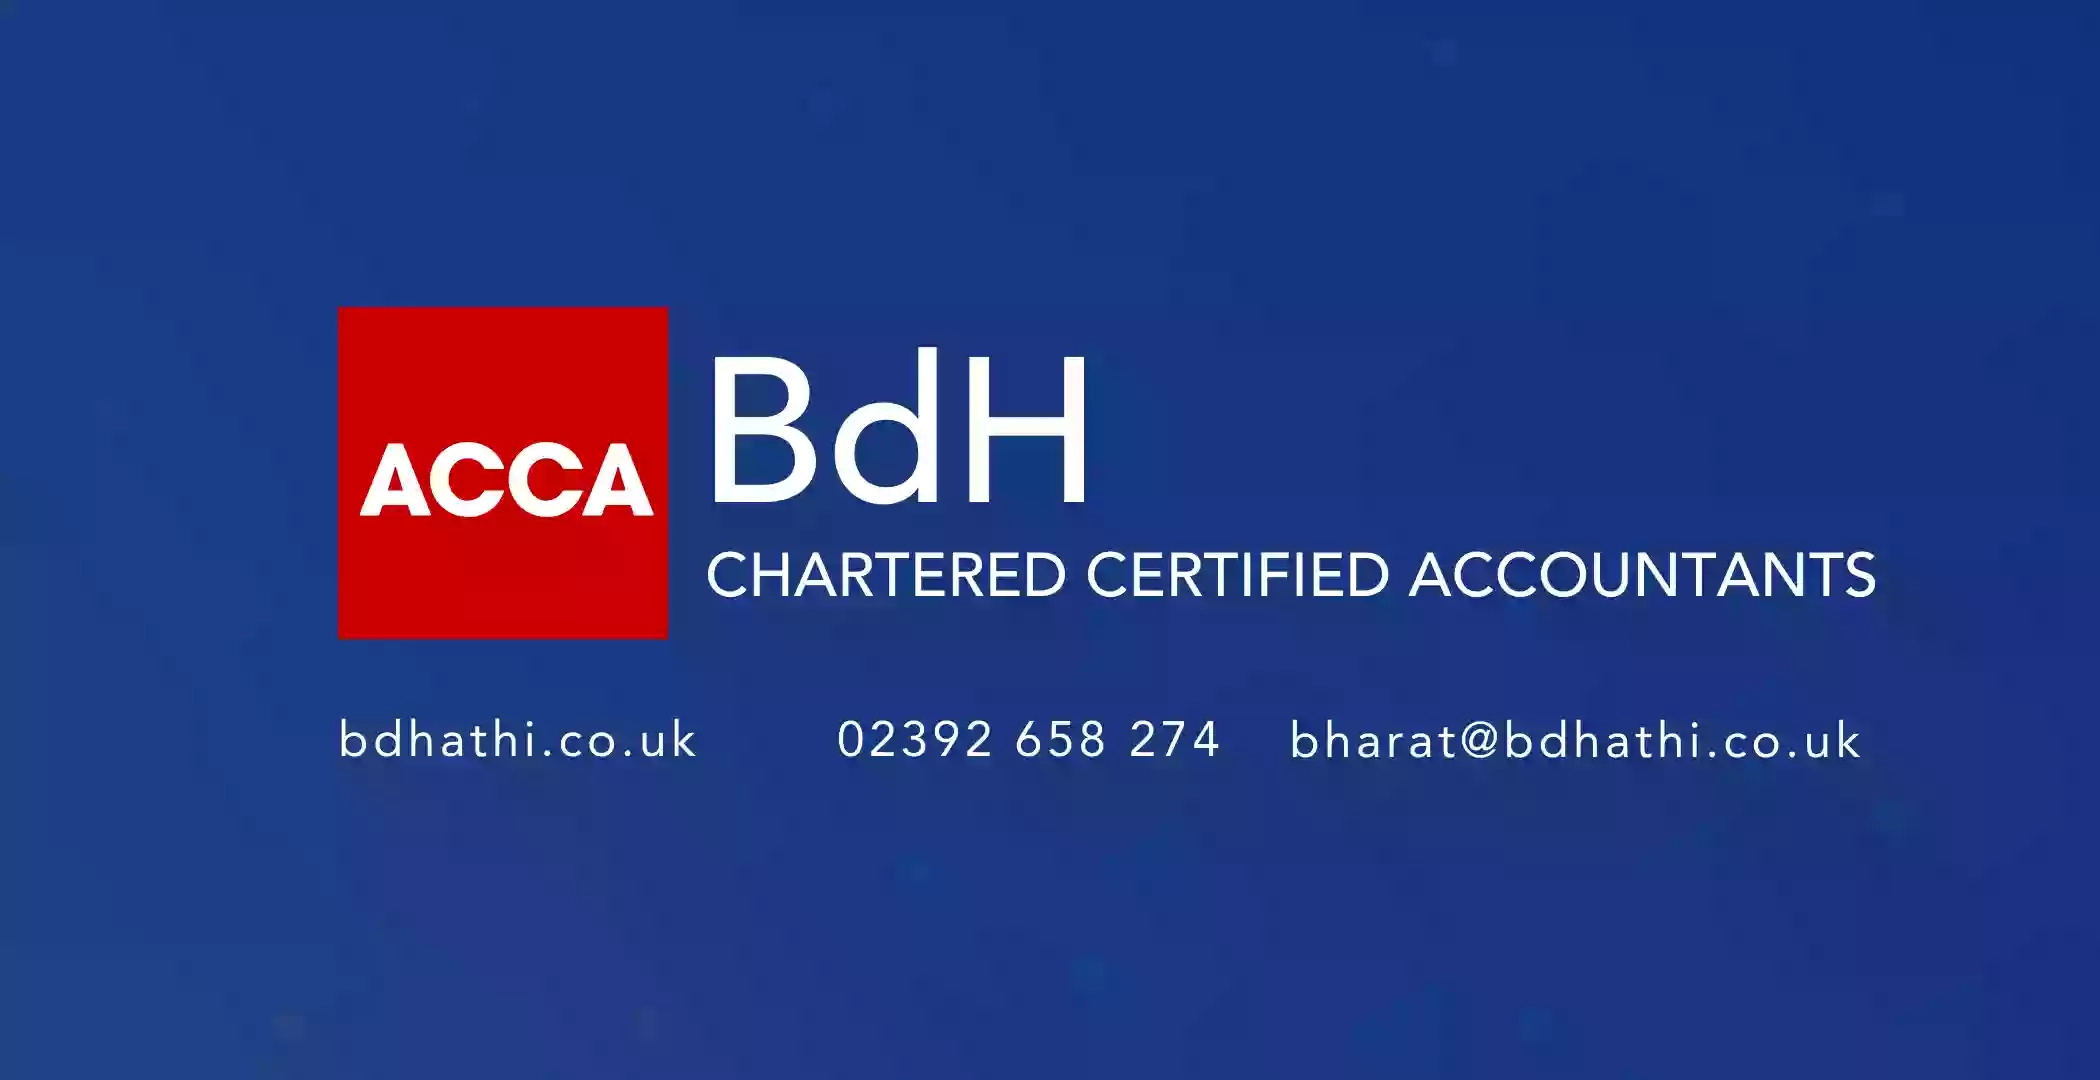 BdH Chartered Certified Accountants